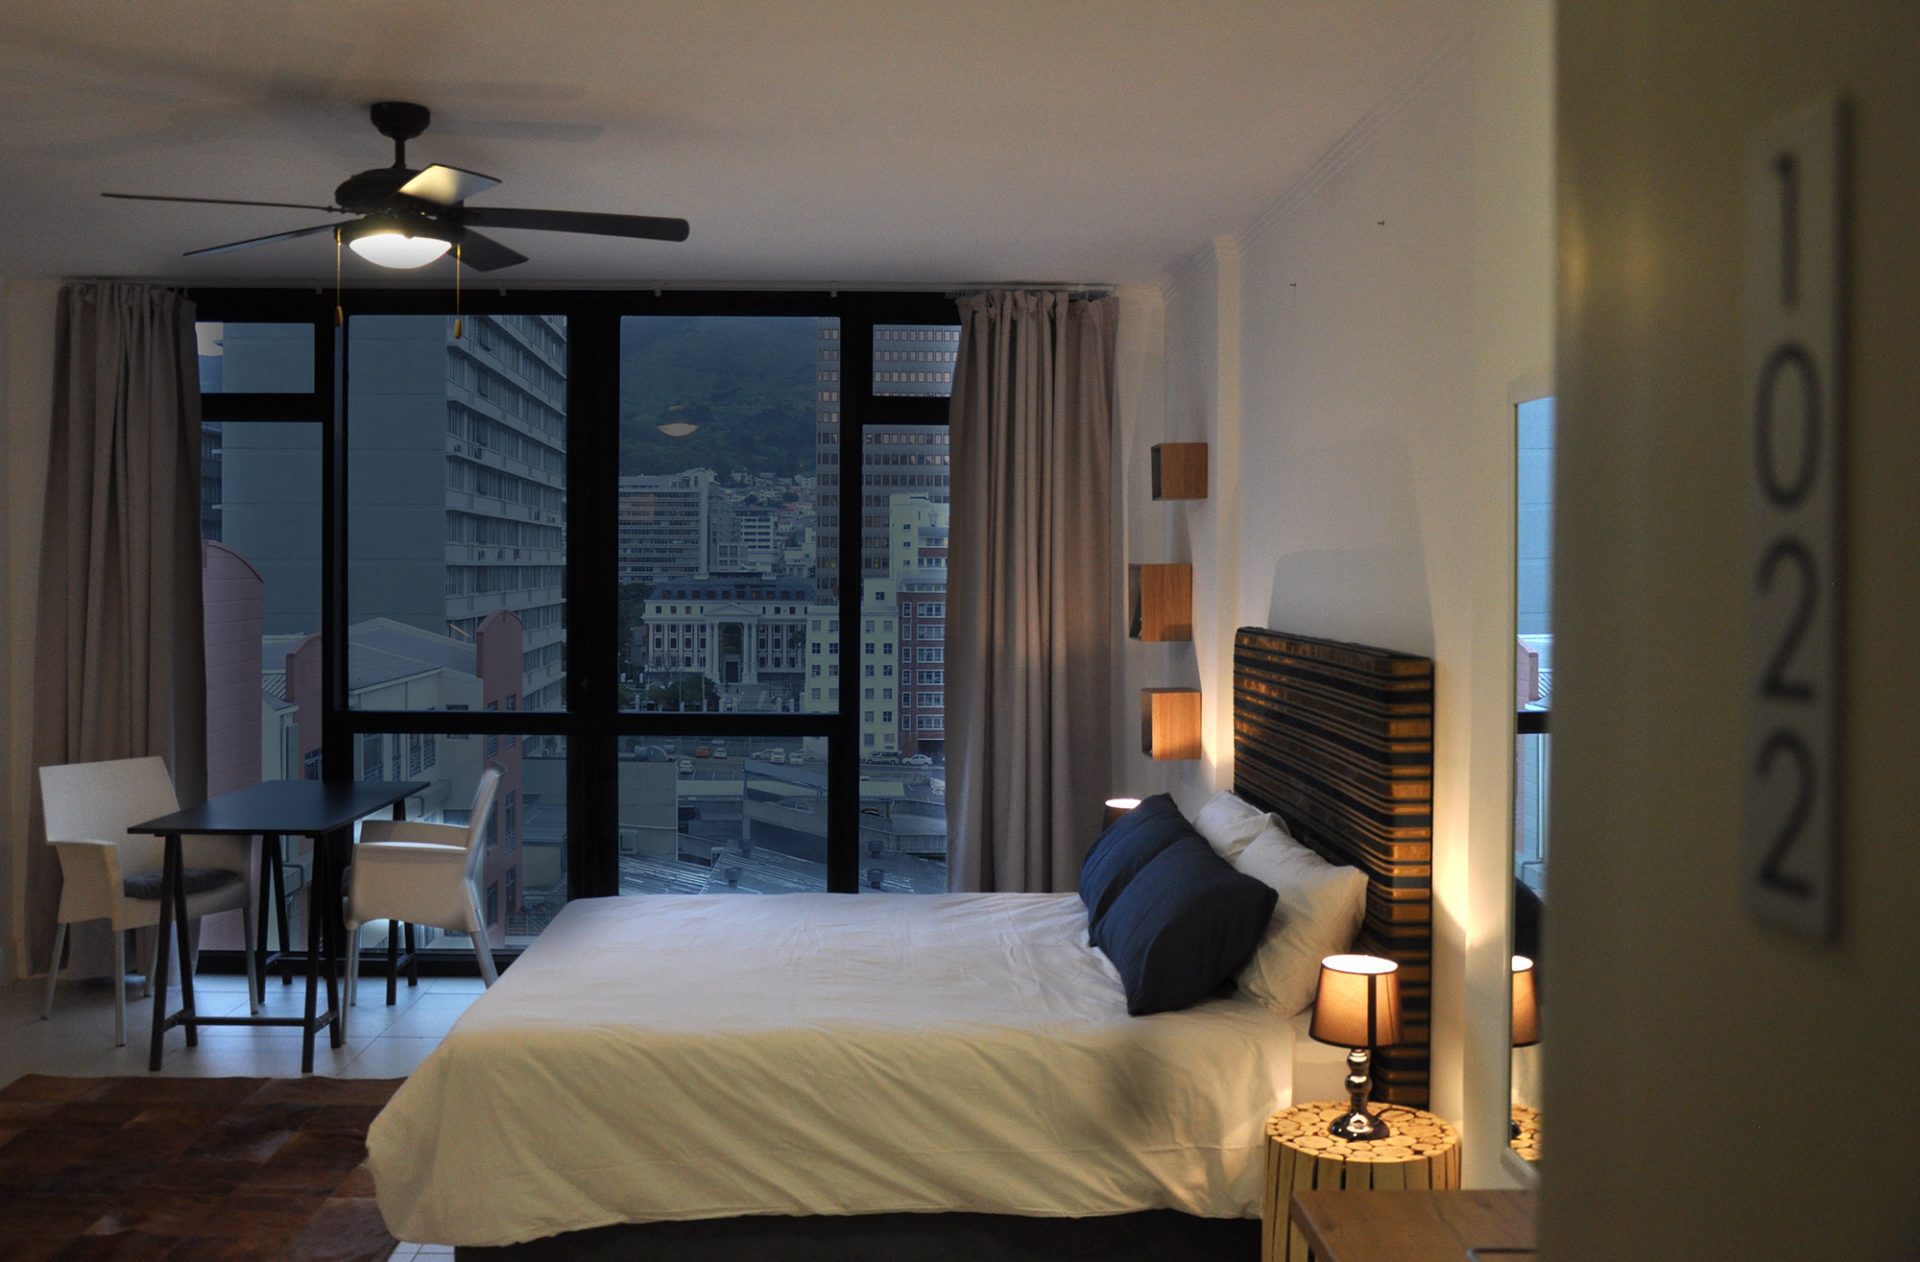 Photo 5 of Cityscape Urban Studio accommodation in City Centre, Cape Town with 1 bedrooms and 1 bathrooms